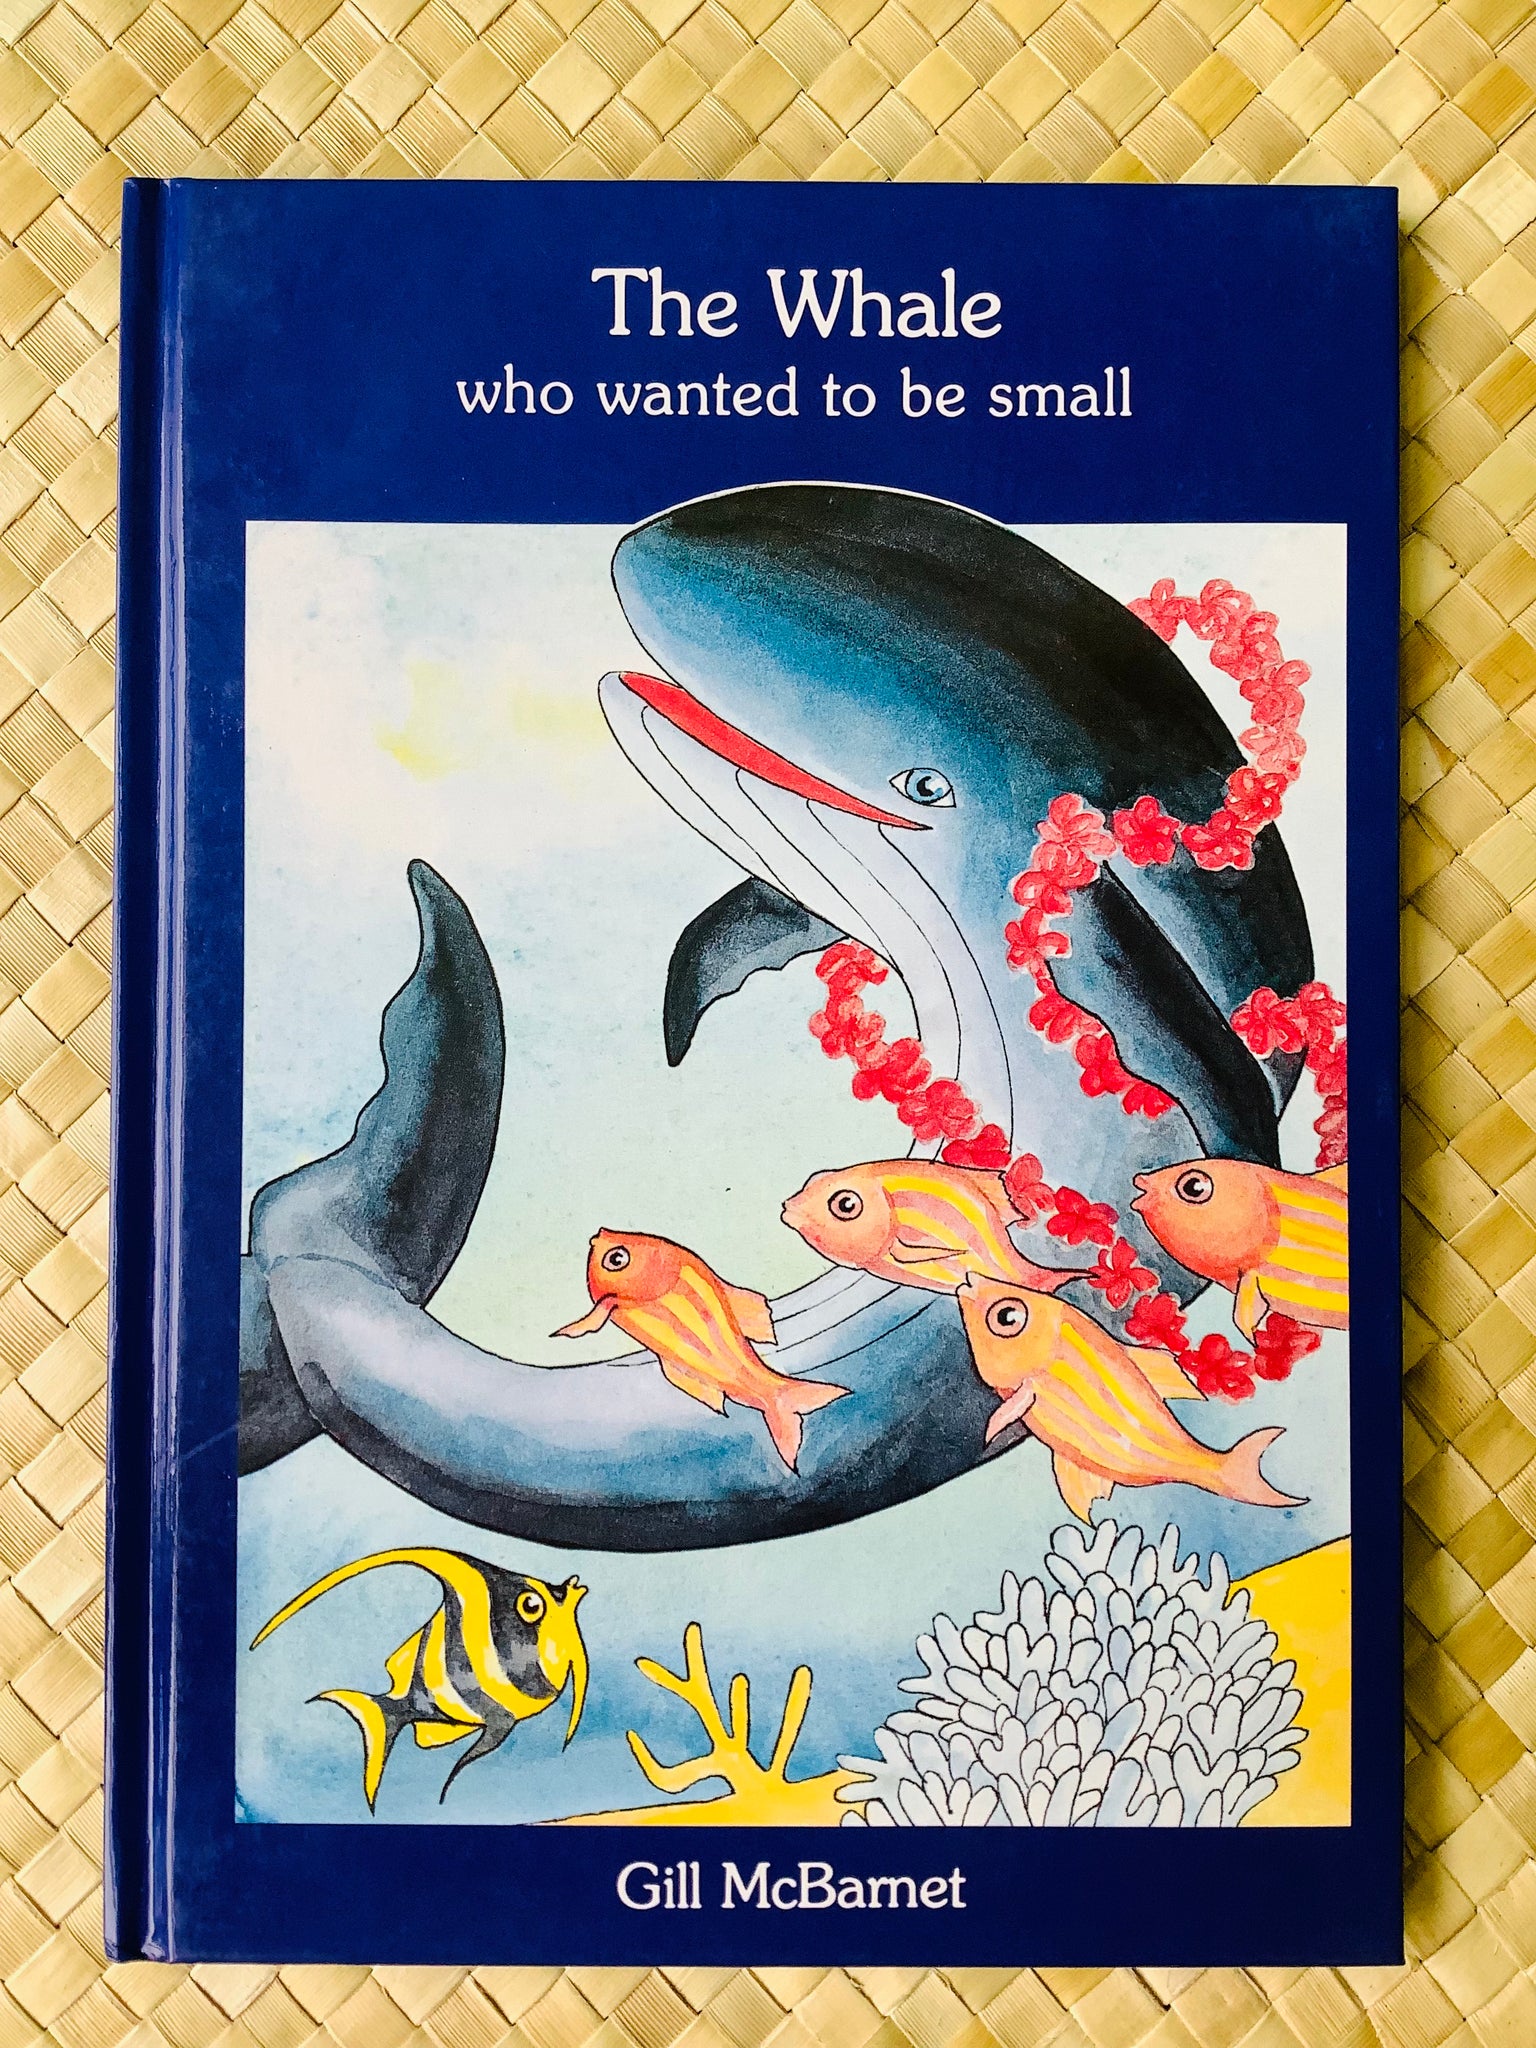 The Whale who wanted to be small